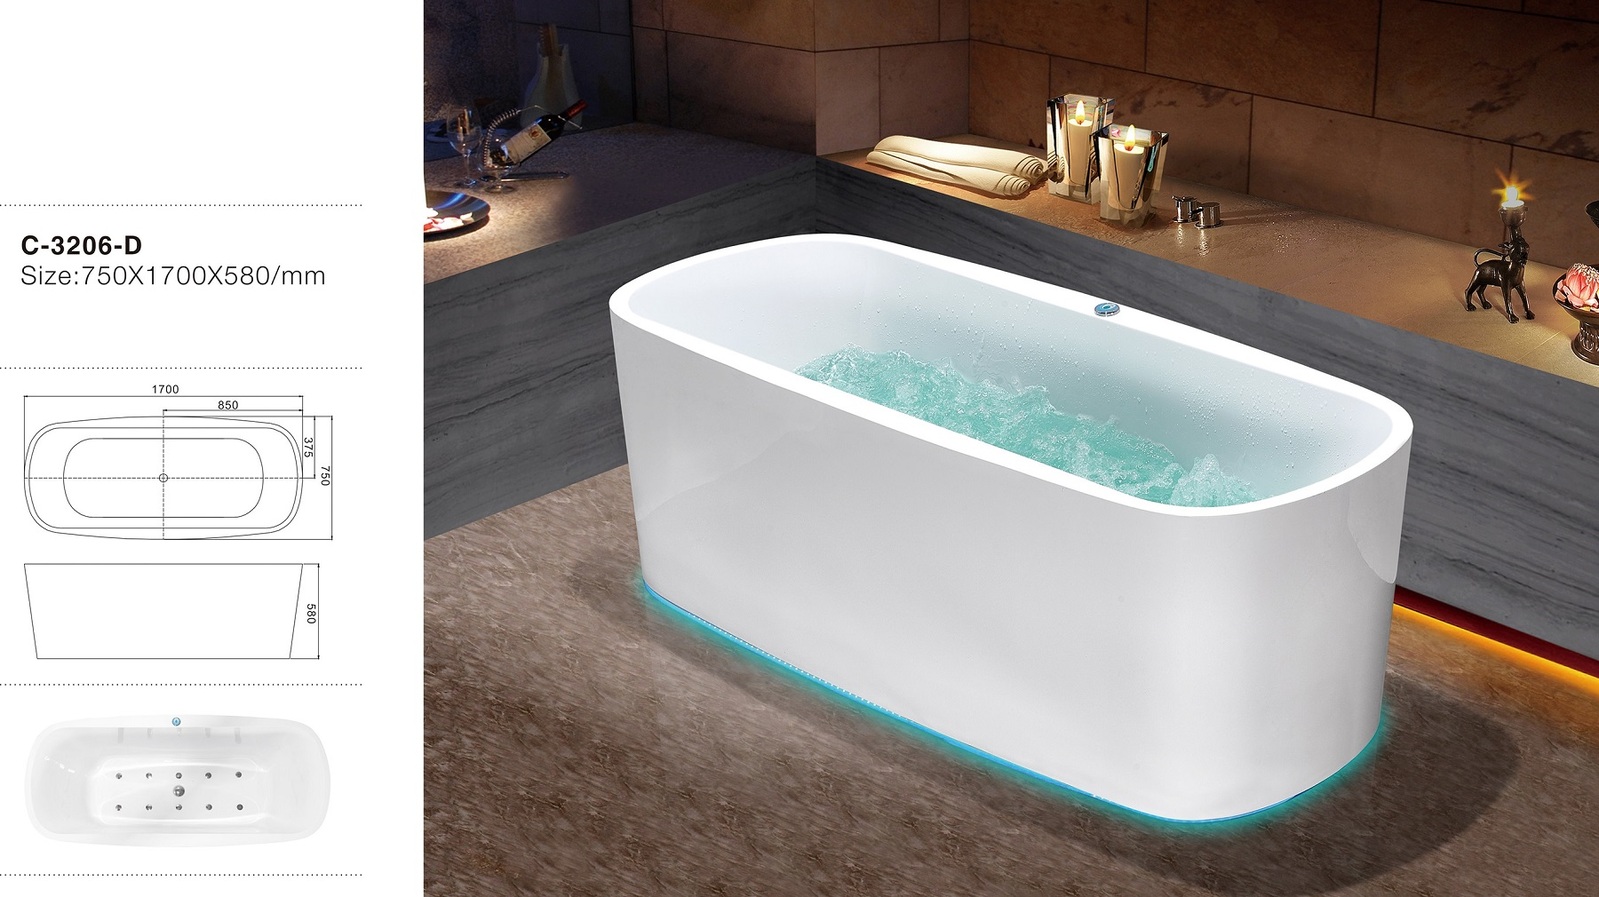 THH Acrylic Free Standing Bathtub Bubble Bath with LED White 750*1700*580mm